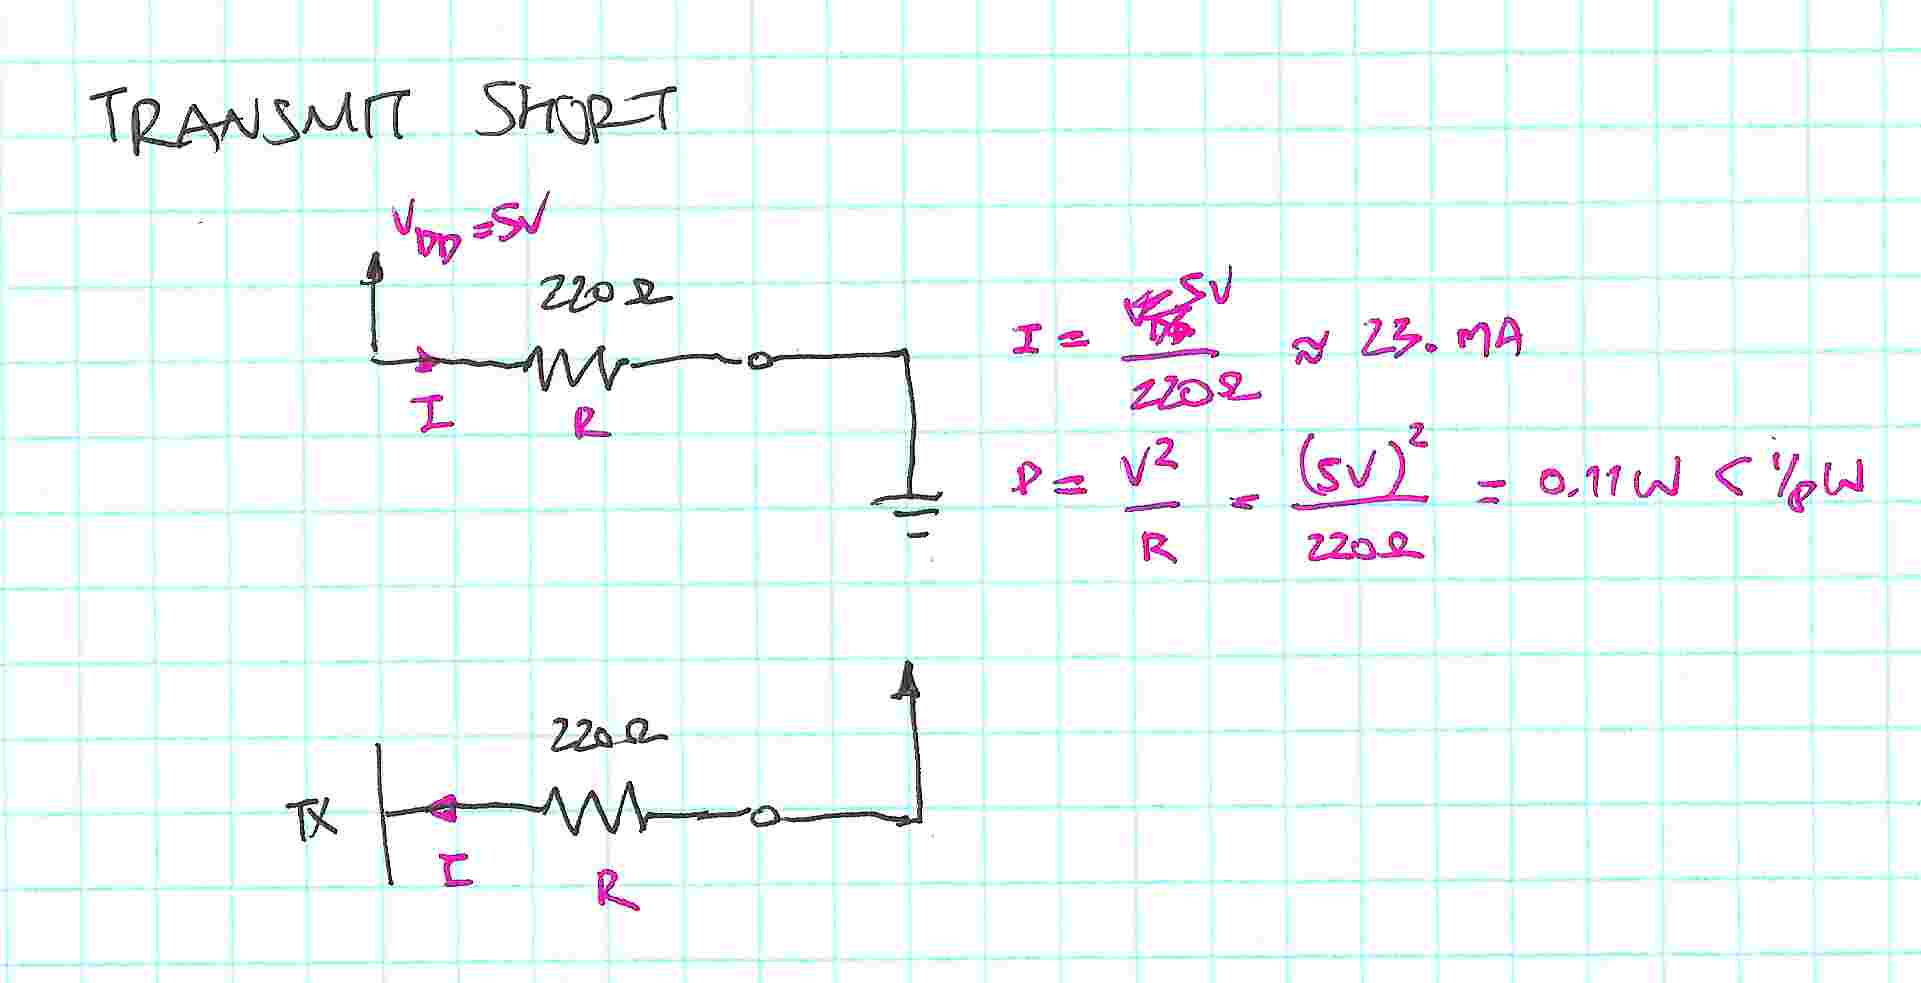 Voltage and current levels for short circuits